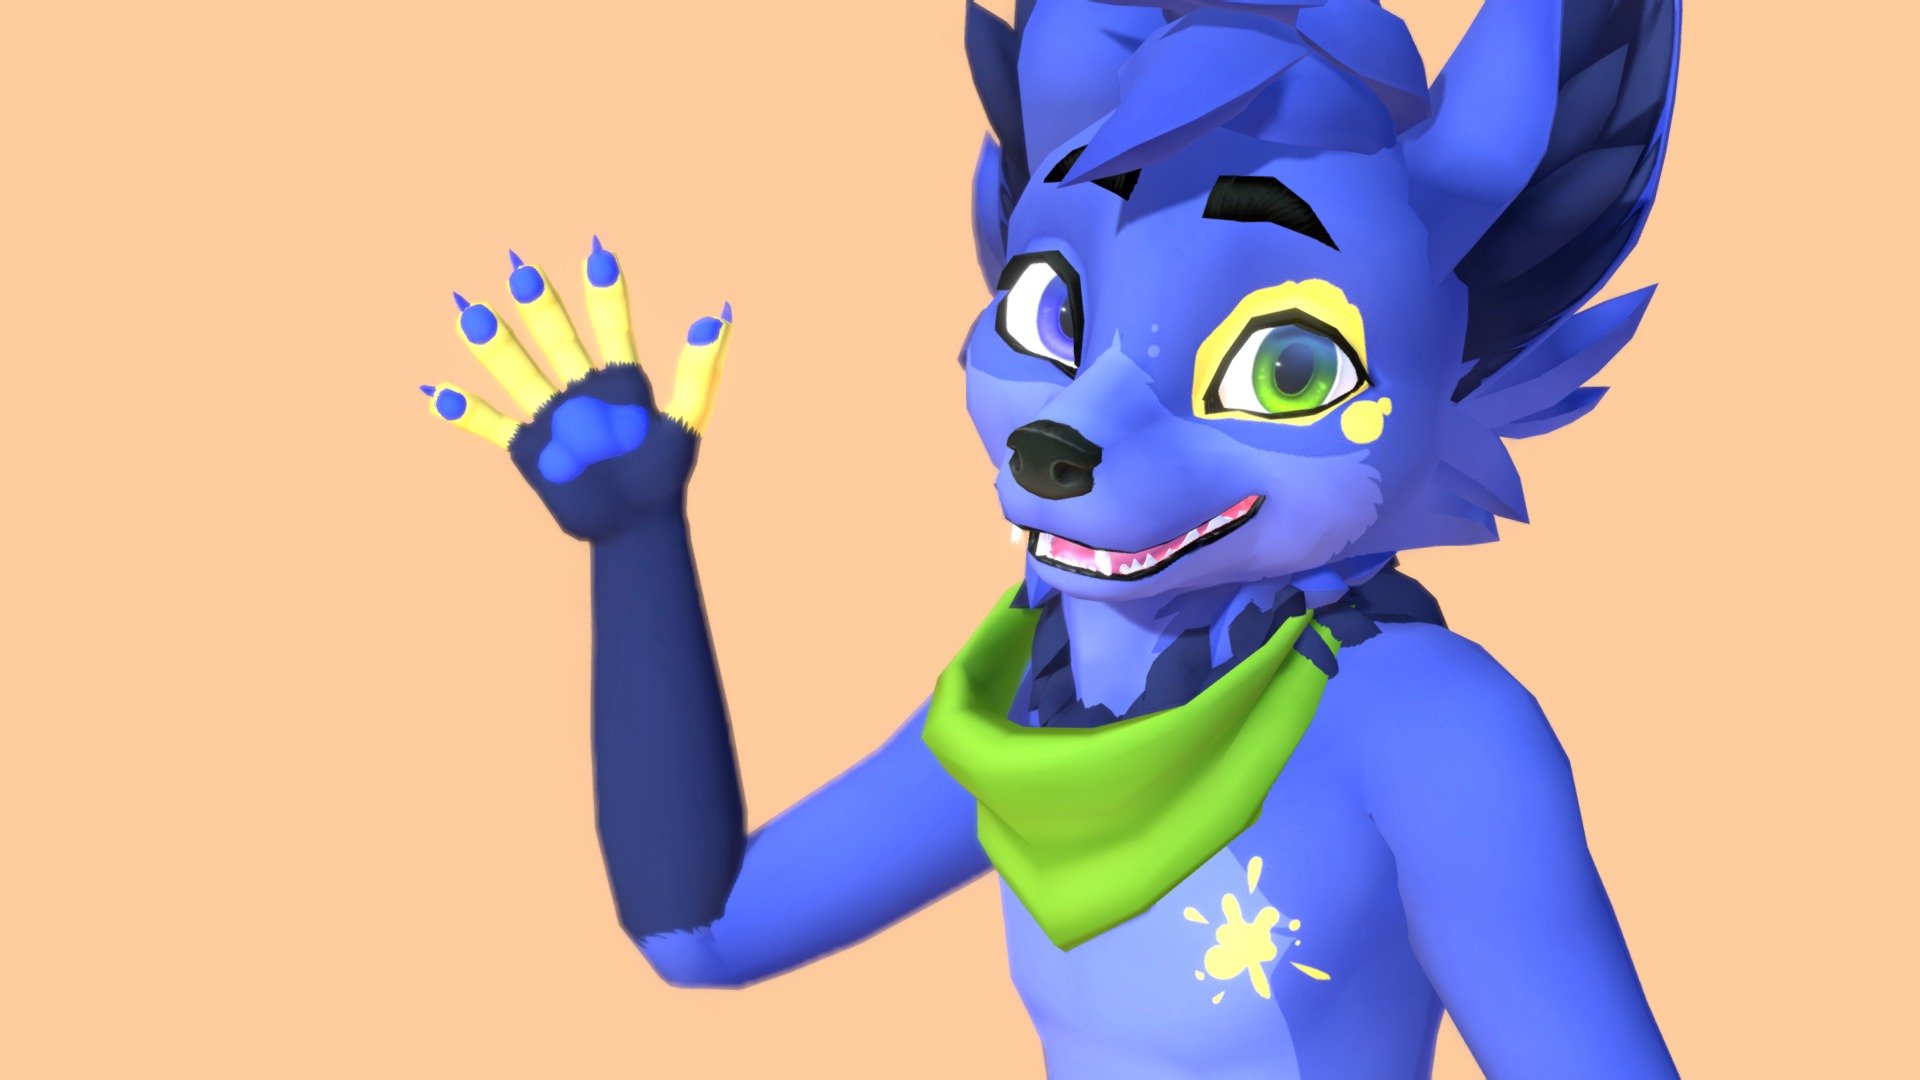 VRChat avatar for @Pringle9822 on Twitter of his fursona Pringle the Fennec!

VRCSDK3 Support
Full Body Tracking Support
CATS Eye Tracking
4 Custom Gesture expressions w/ Eyes Open and Eyes Closed Variants
Ear, Hair, Tail Physbones
Floor Plane Collider for Tail
Tail Wag Toggle
Clothing Toggle

Commission Info https://nyxumnightshade.carrd.co/ - Pringle Fox VrChatAvatar - 3D model by nyxumnightshade 3d model